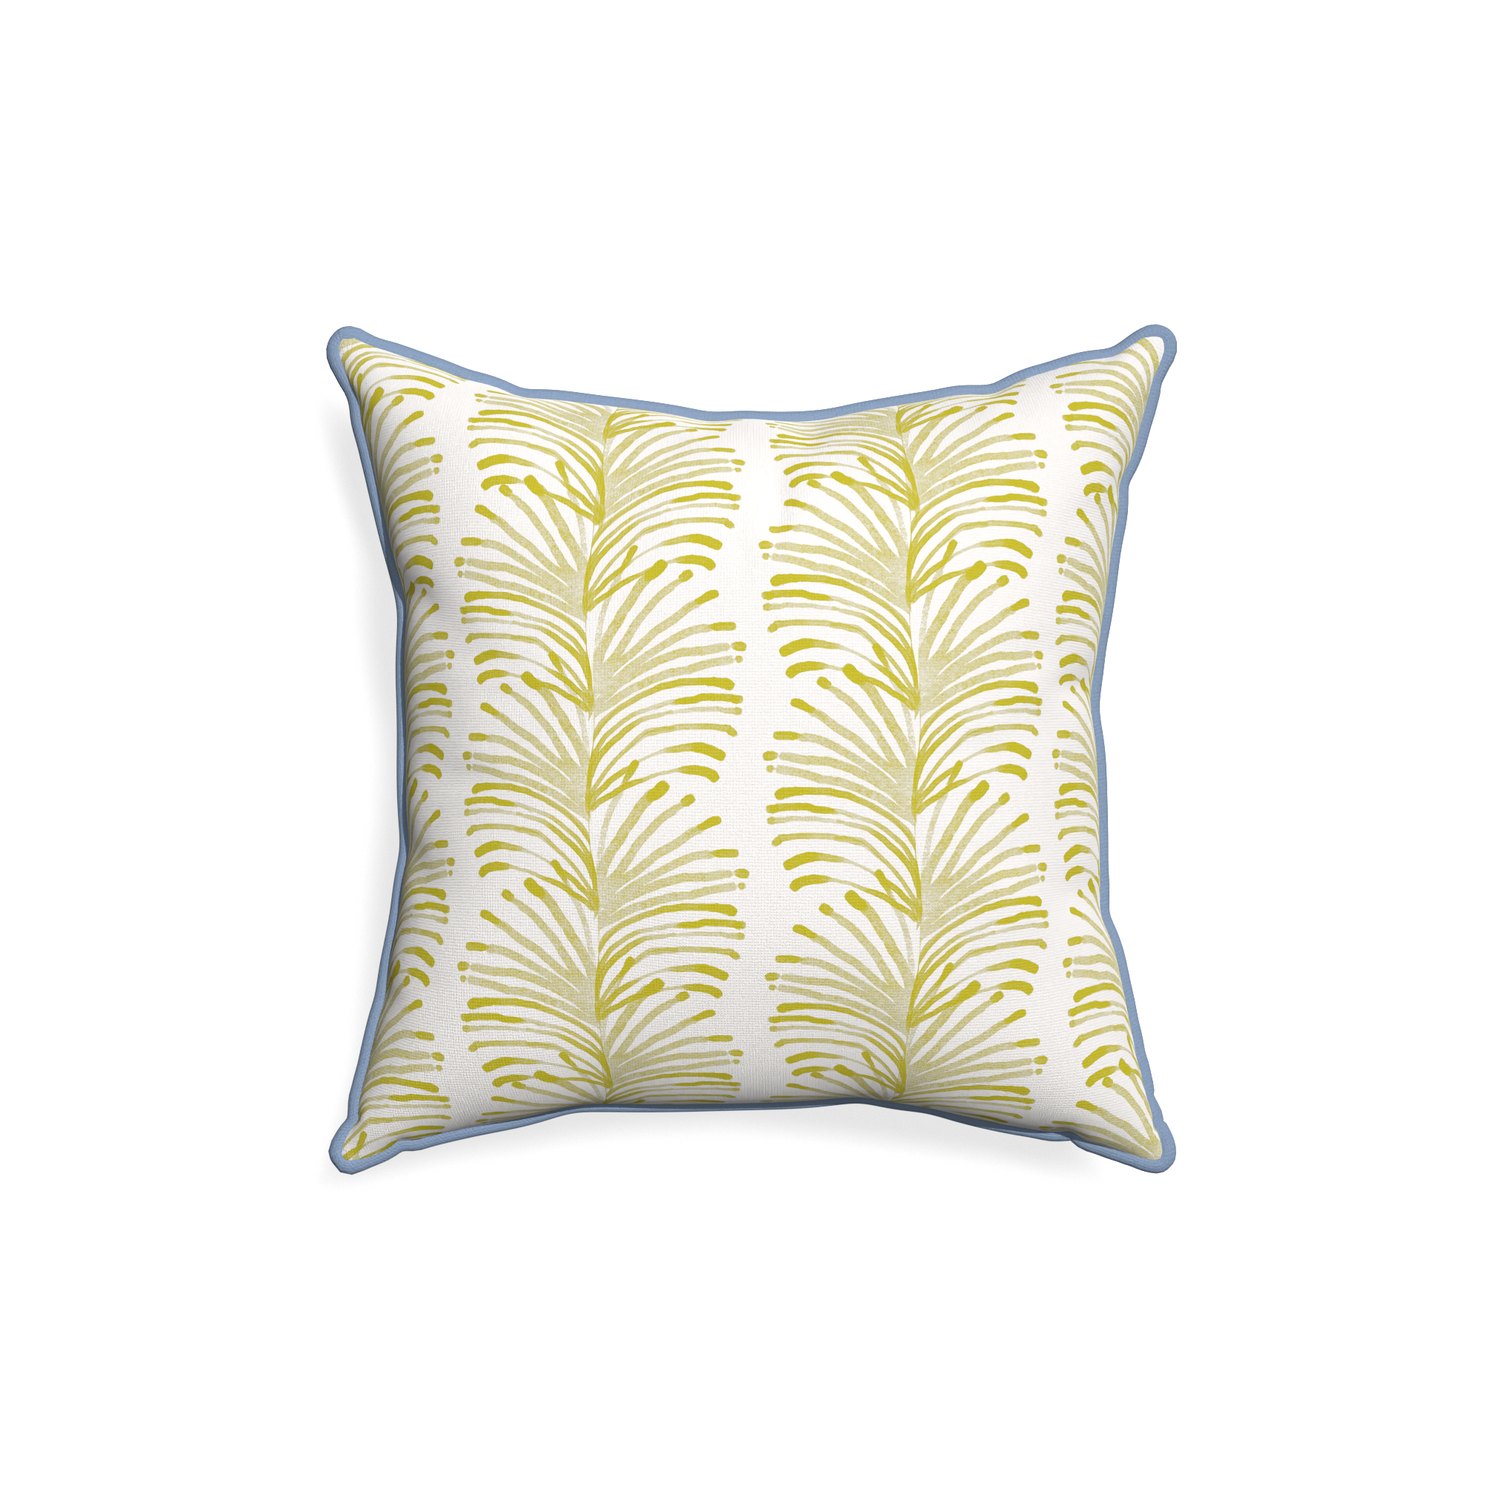 18-square emma chartreuse custom yellow stripe chartreusepillow with sky piping on white background